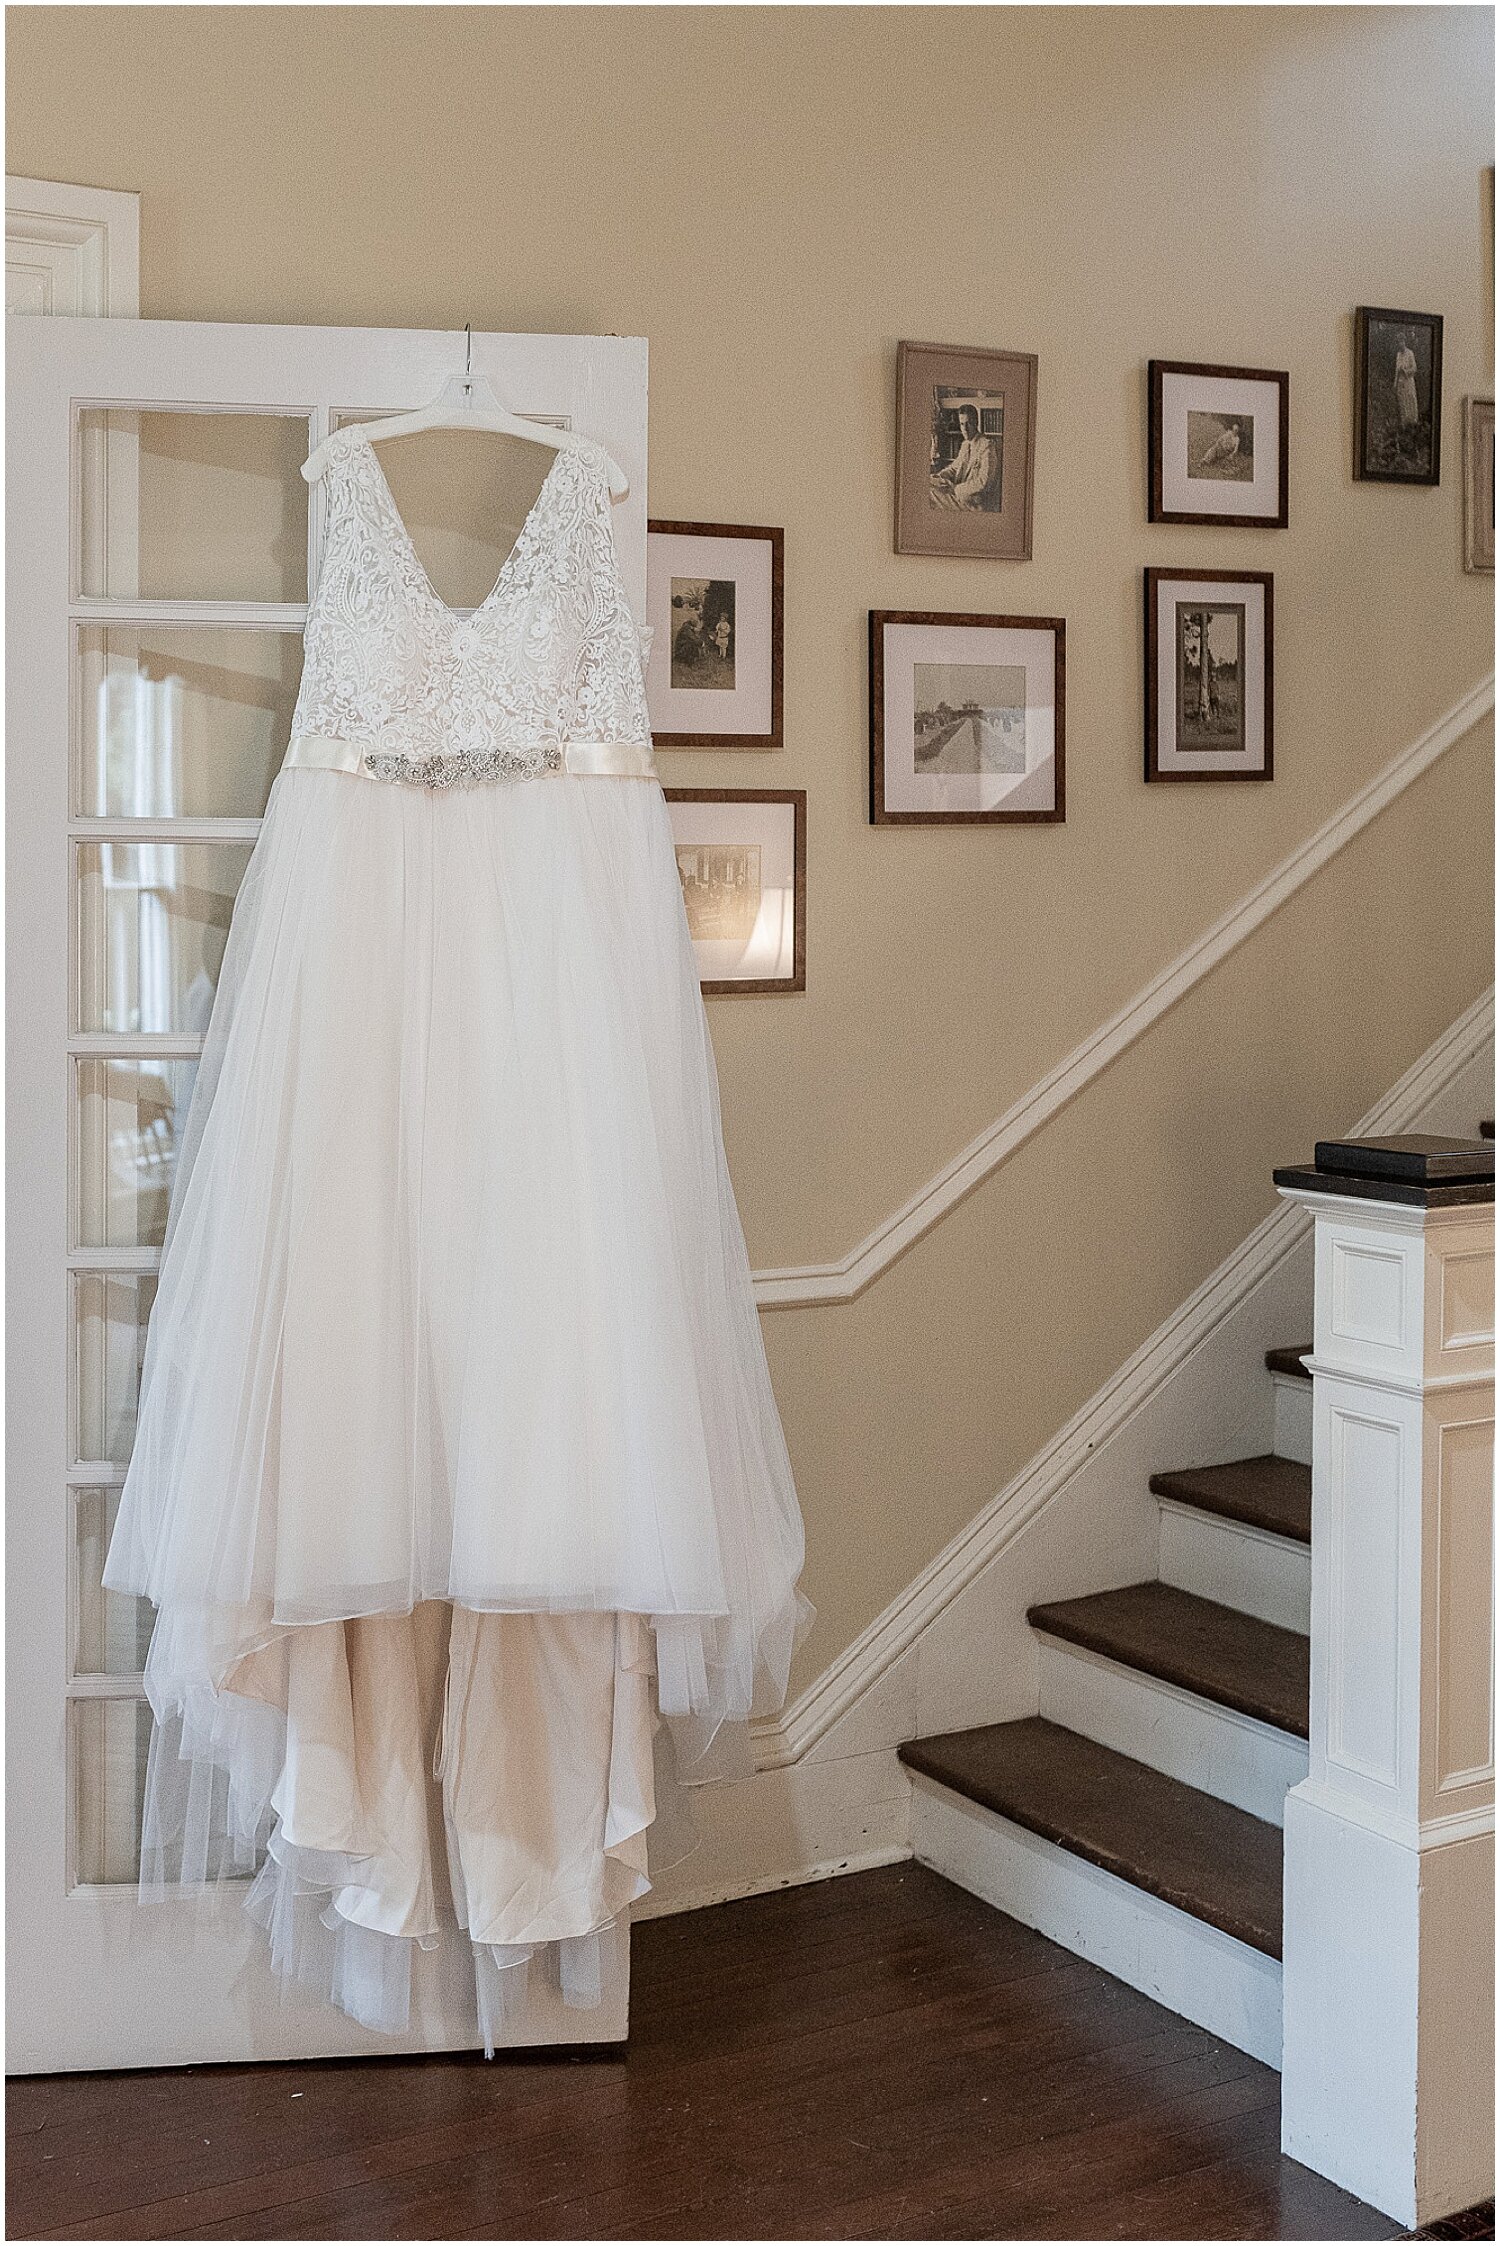  Bride’s wedding dress hung in the bridal suite 